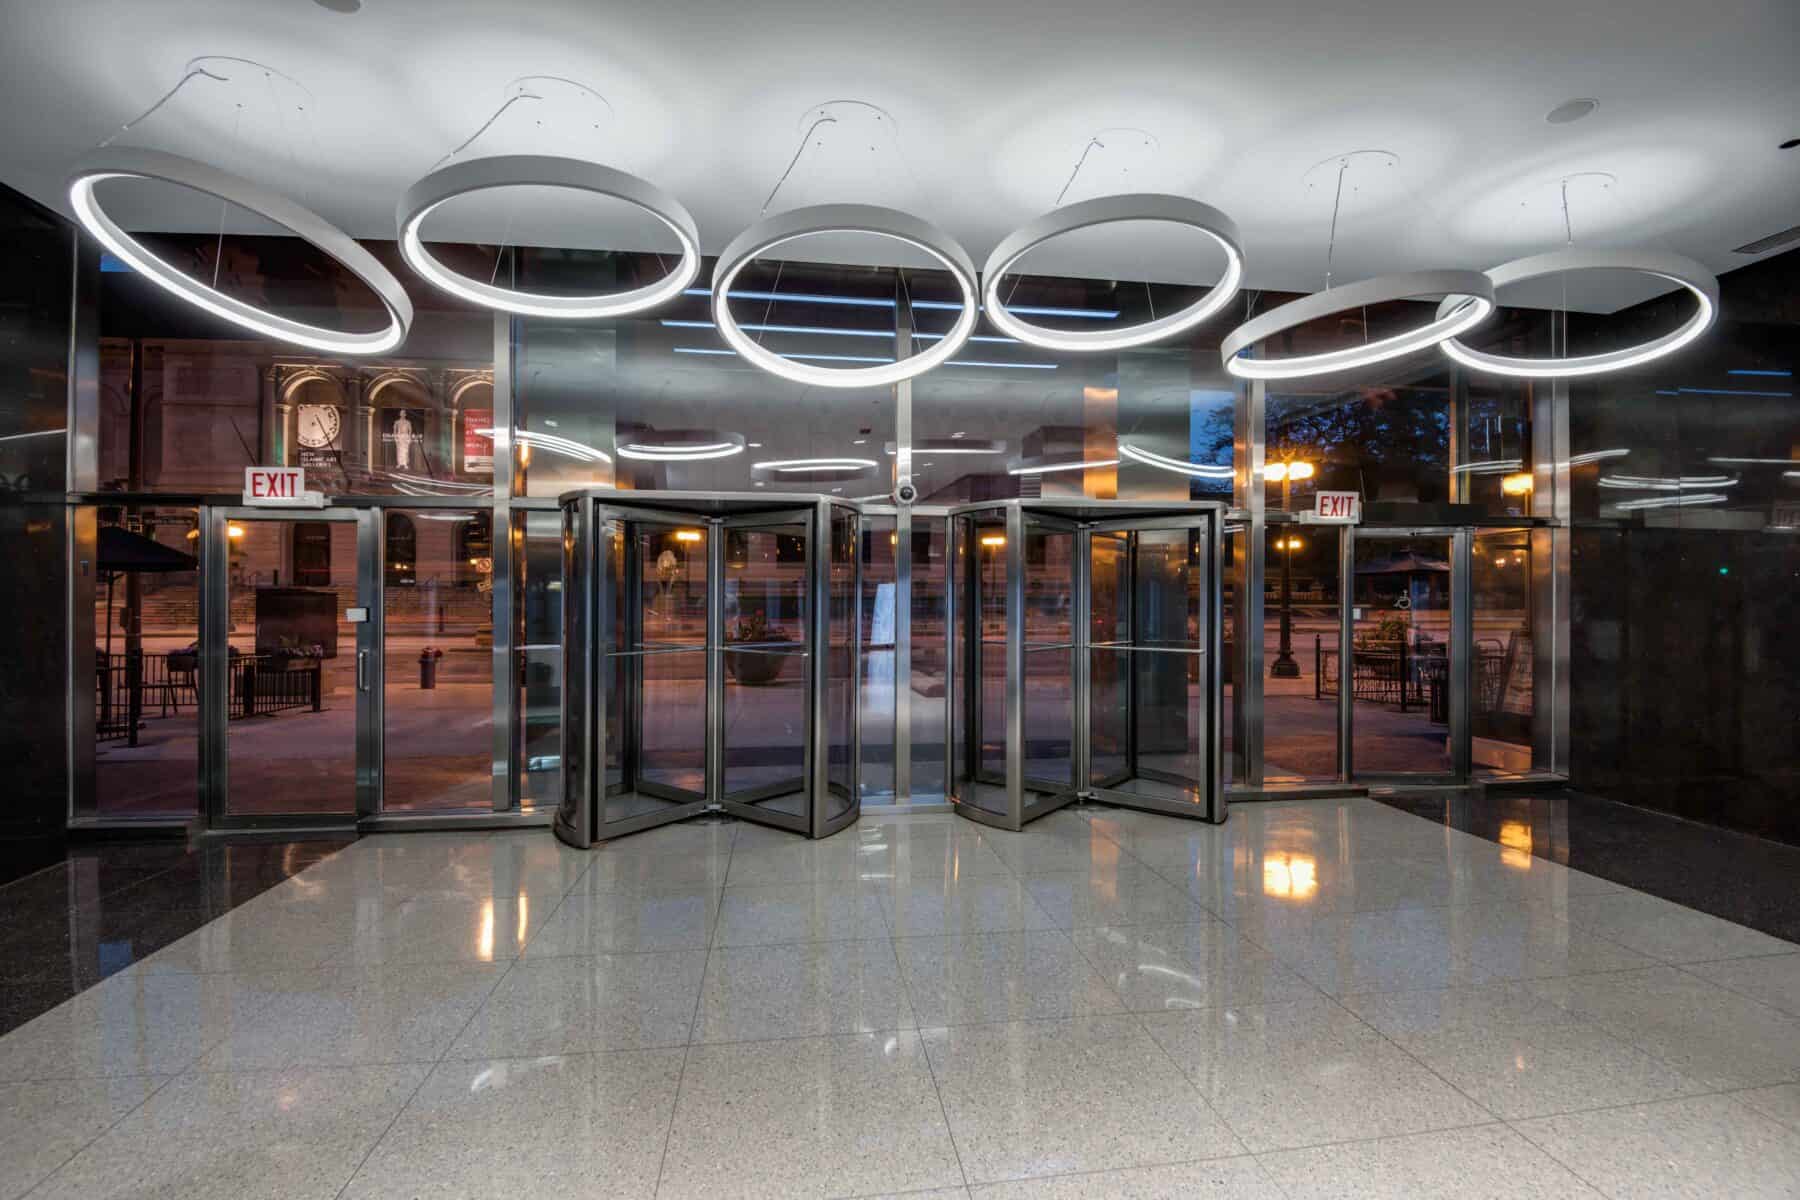 Modern Custom Circular Lights Suspended in Ceiling at Michigan Avenue Lobby by Commercial Builder & General Contractor Structural Enterprises